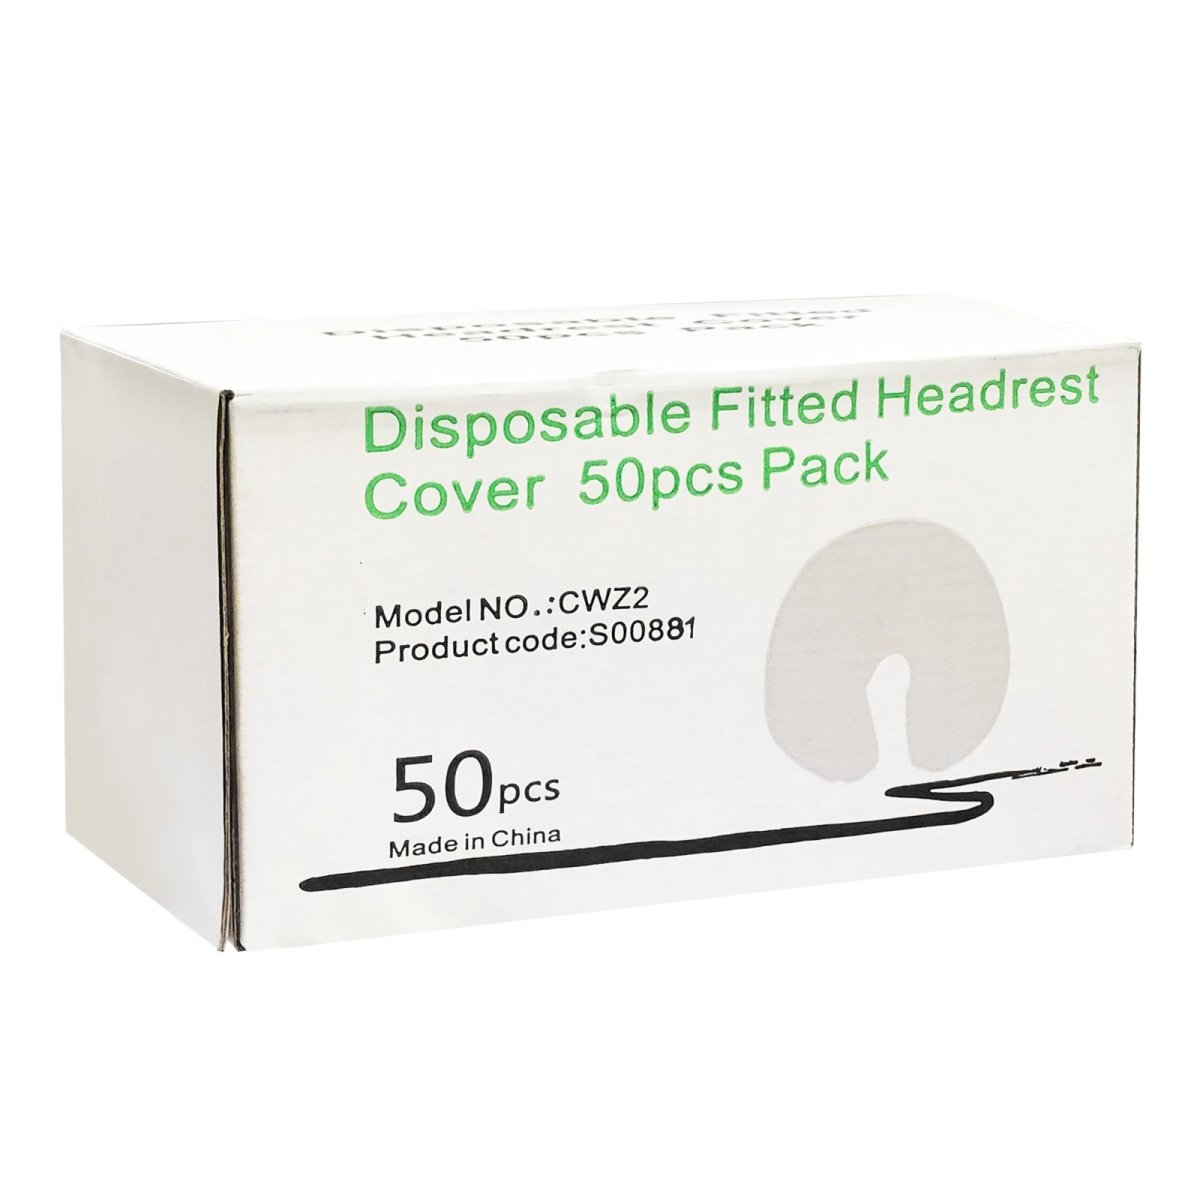 Disposable Face Cradle Cover - Fitted 50 pcs/Box - GreenLife-Disposable Headrest Cover